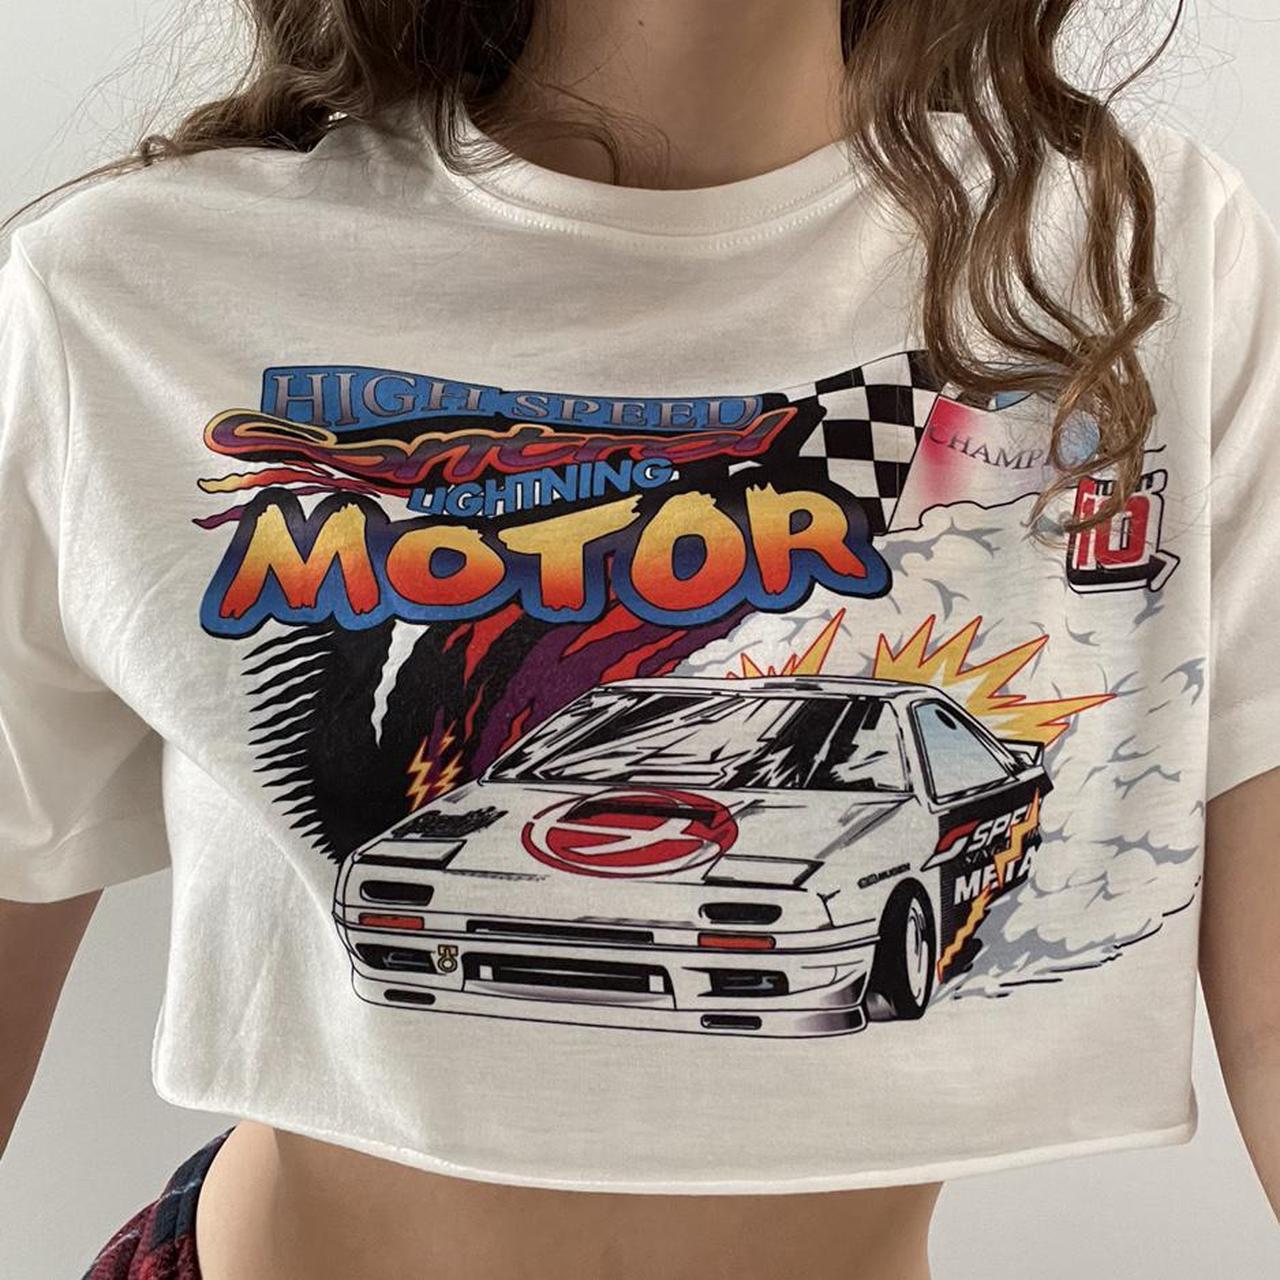 Product Image 4 - Cropped graphic car top
Size M
Brand